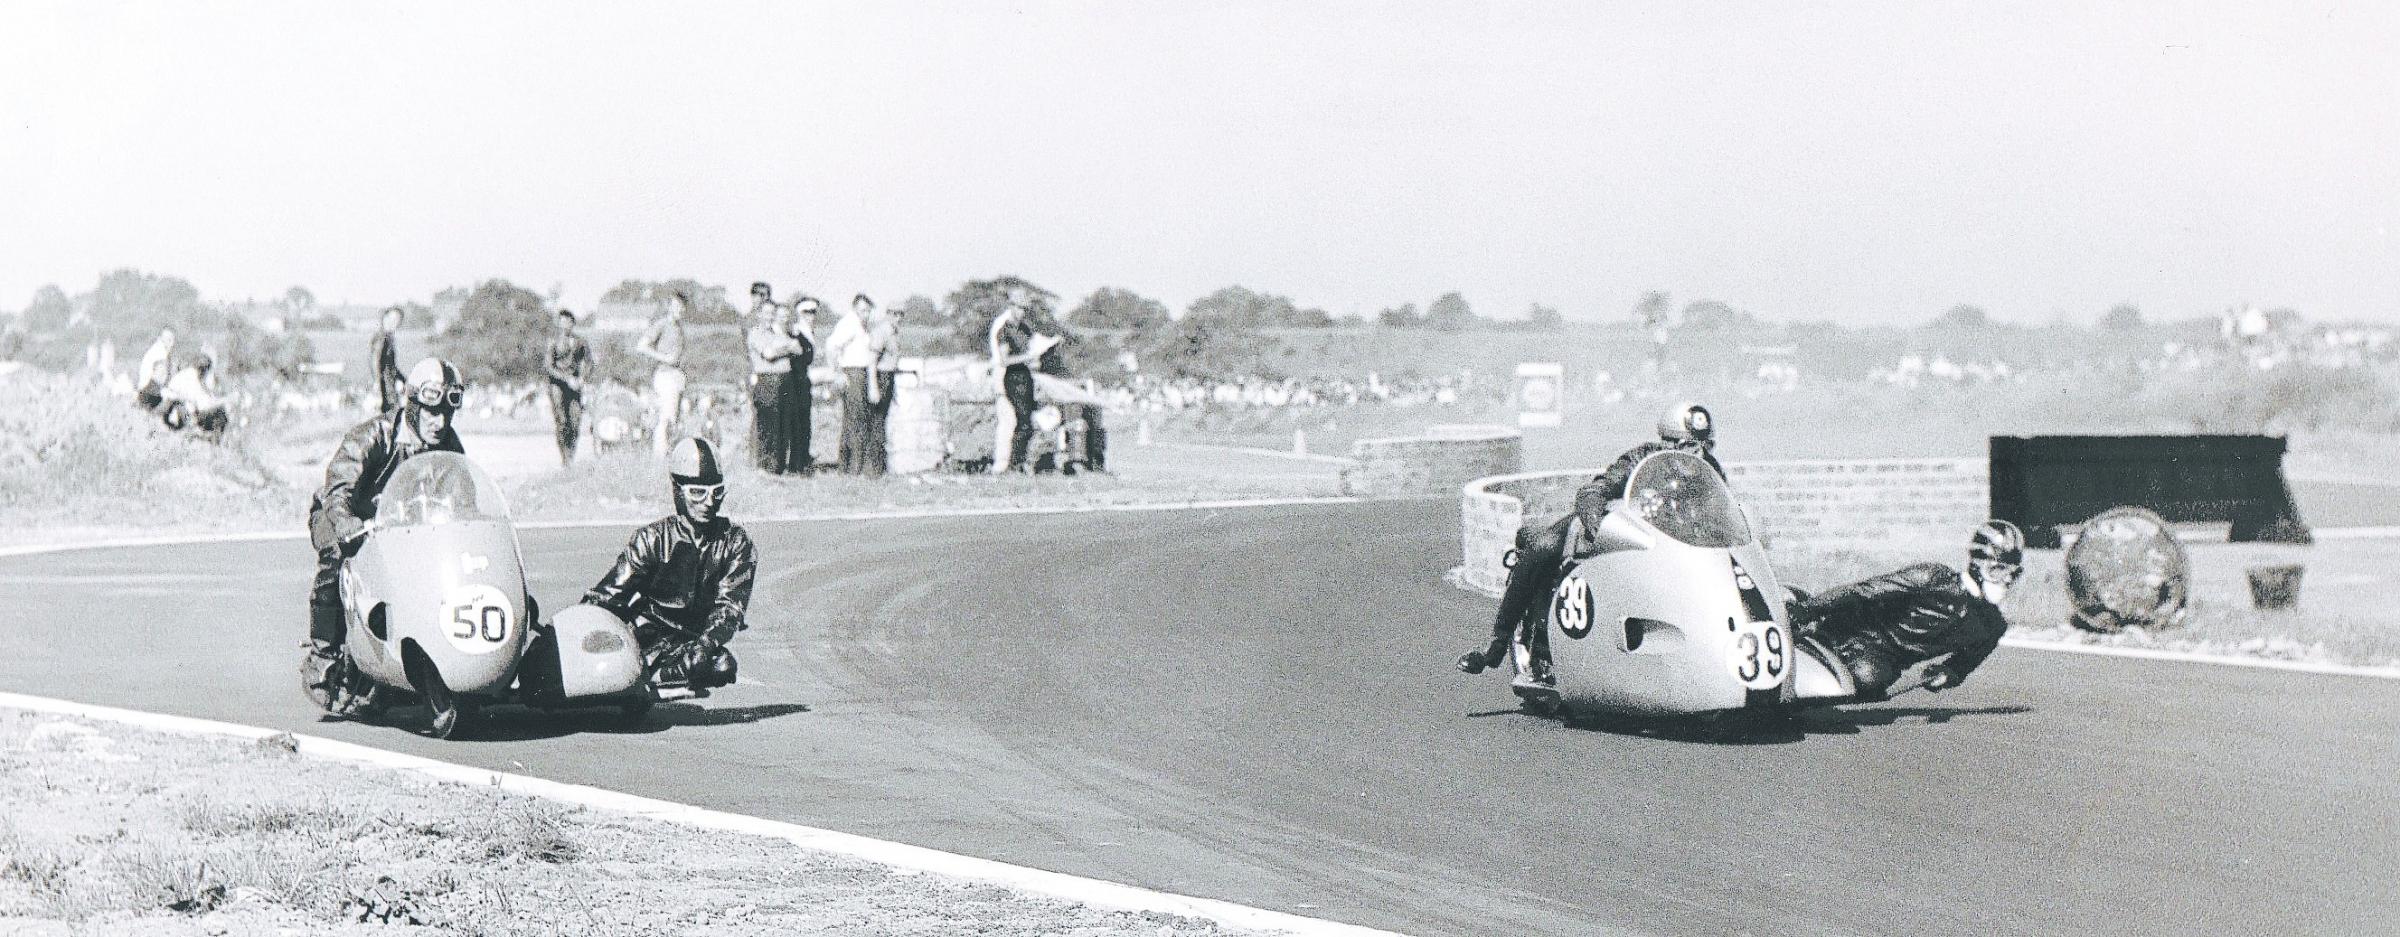 Sidecar racing at Croft circuit on August 17, 1964, soon after the airfield was sold. It is now Croft Circuit